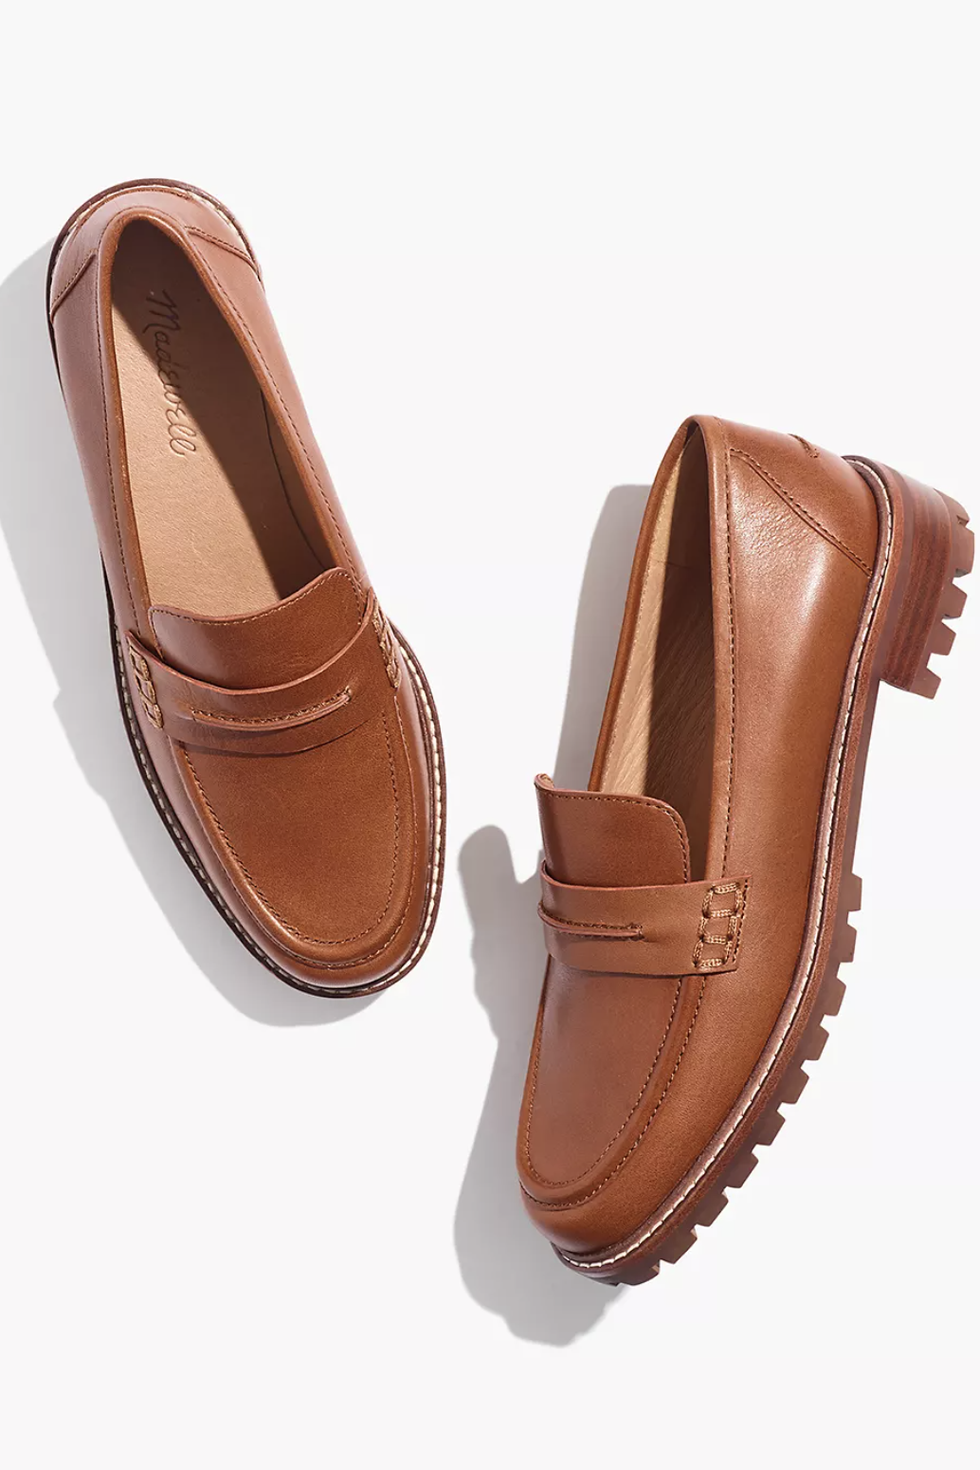 Best Loafers for Women 2023